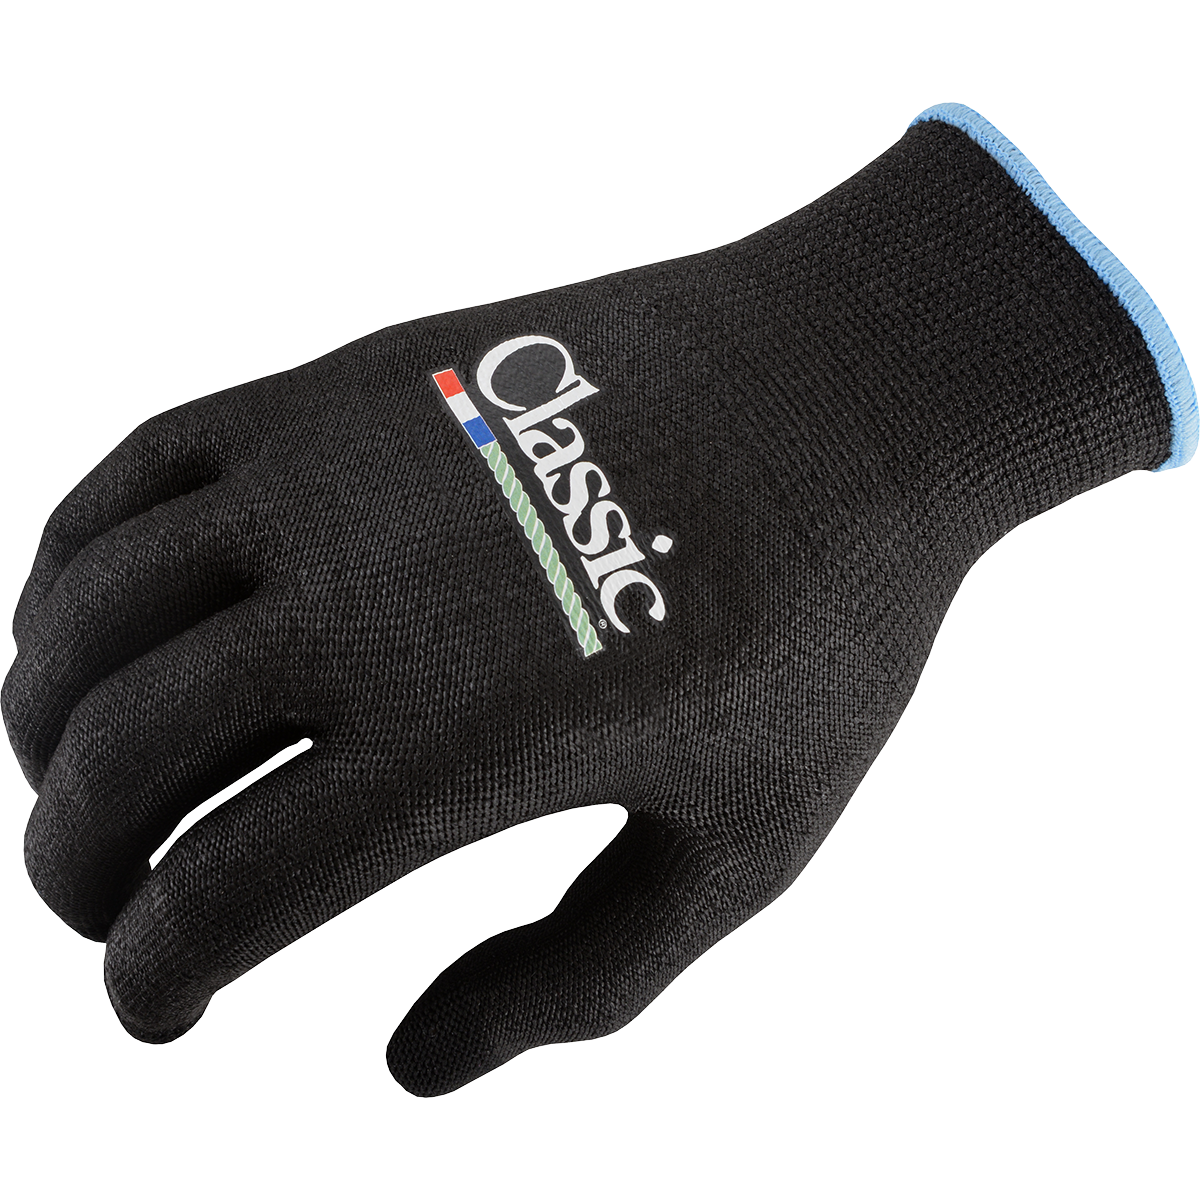 Classic Rope Company Classic Black Horse Equine Roping Glove